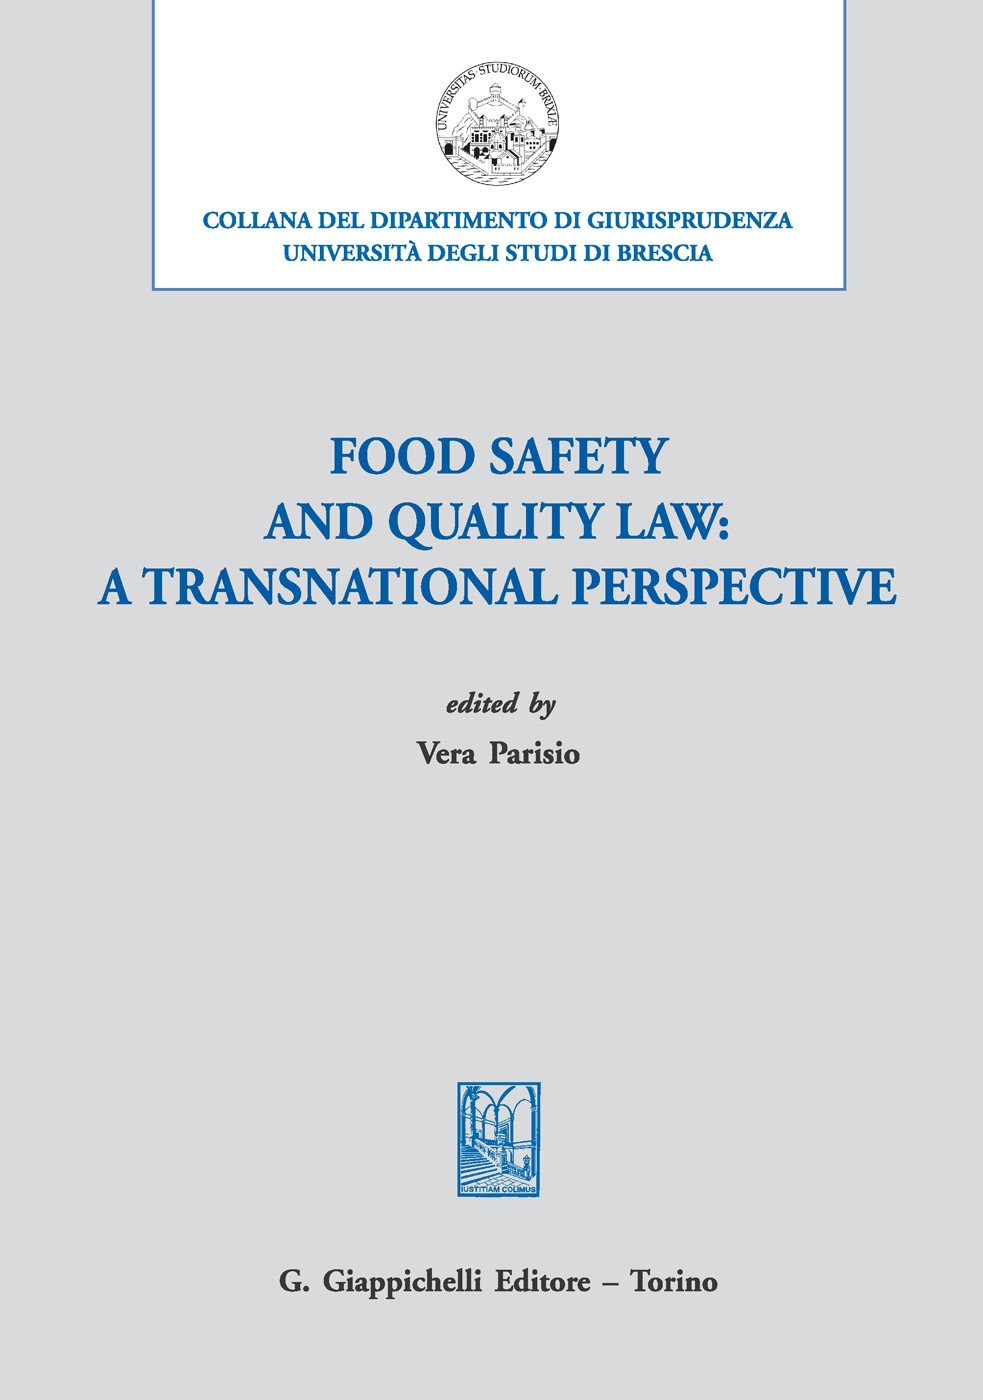 Food safety and quality law: a transnational perspective - Librerie.coop